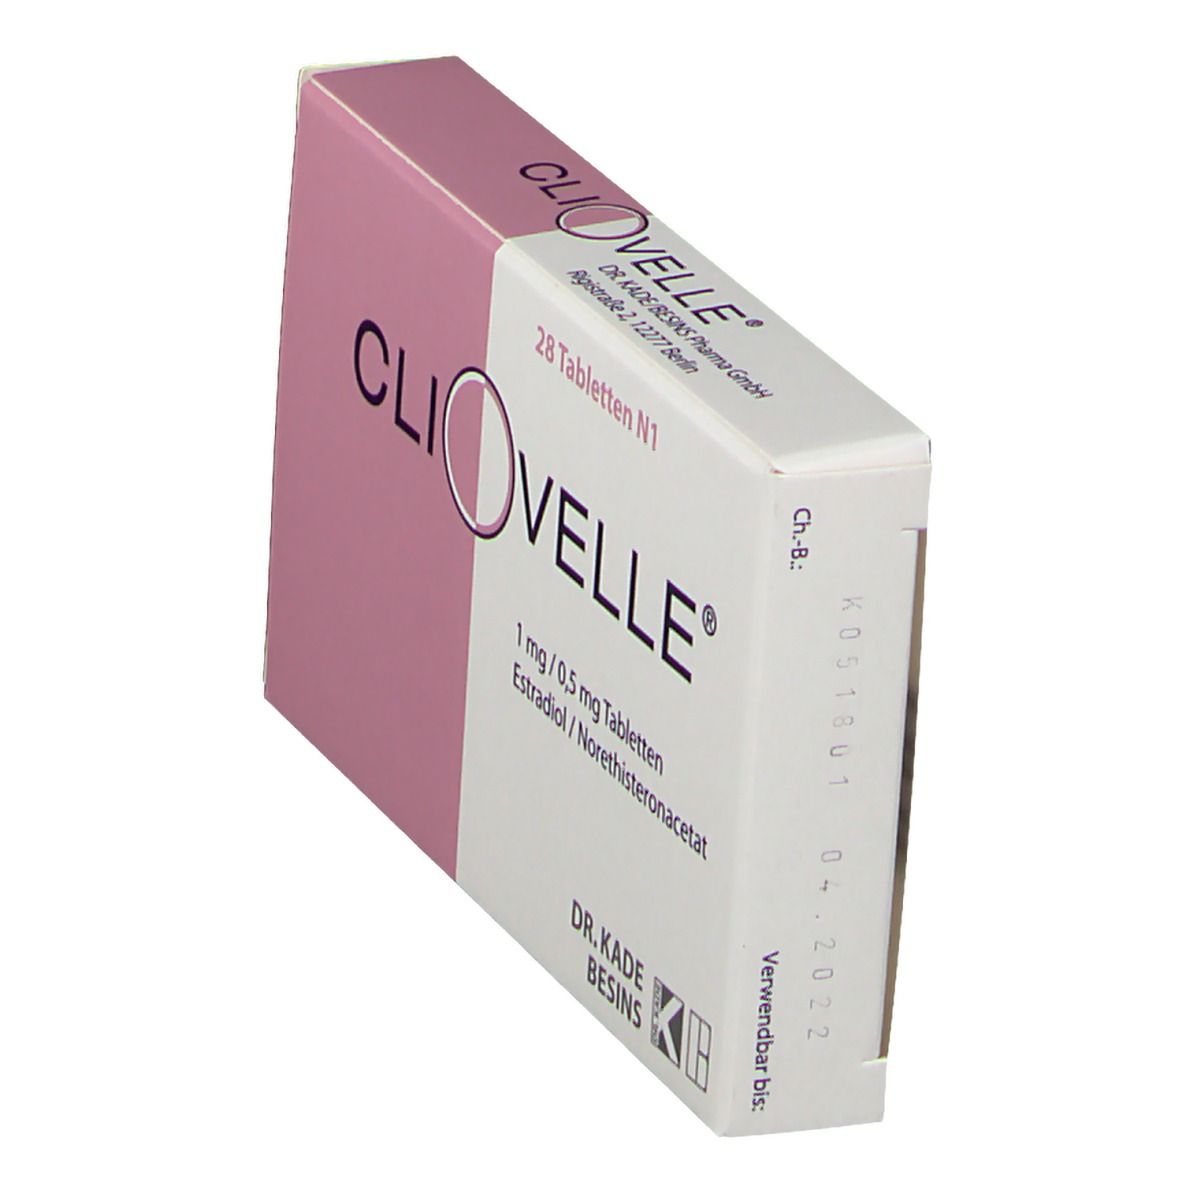 CLIOVELLE® 1 mg/0,5 mg